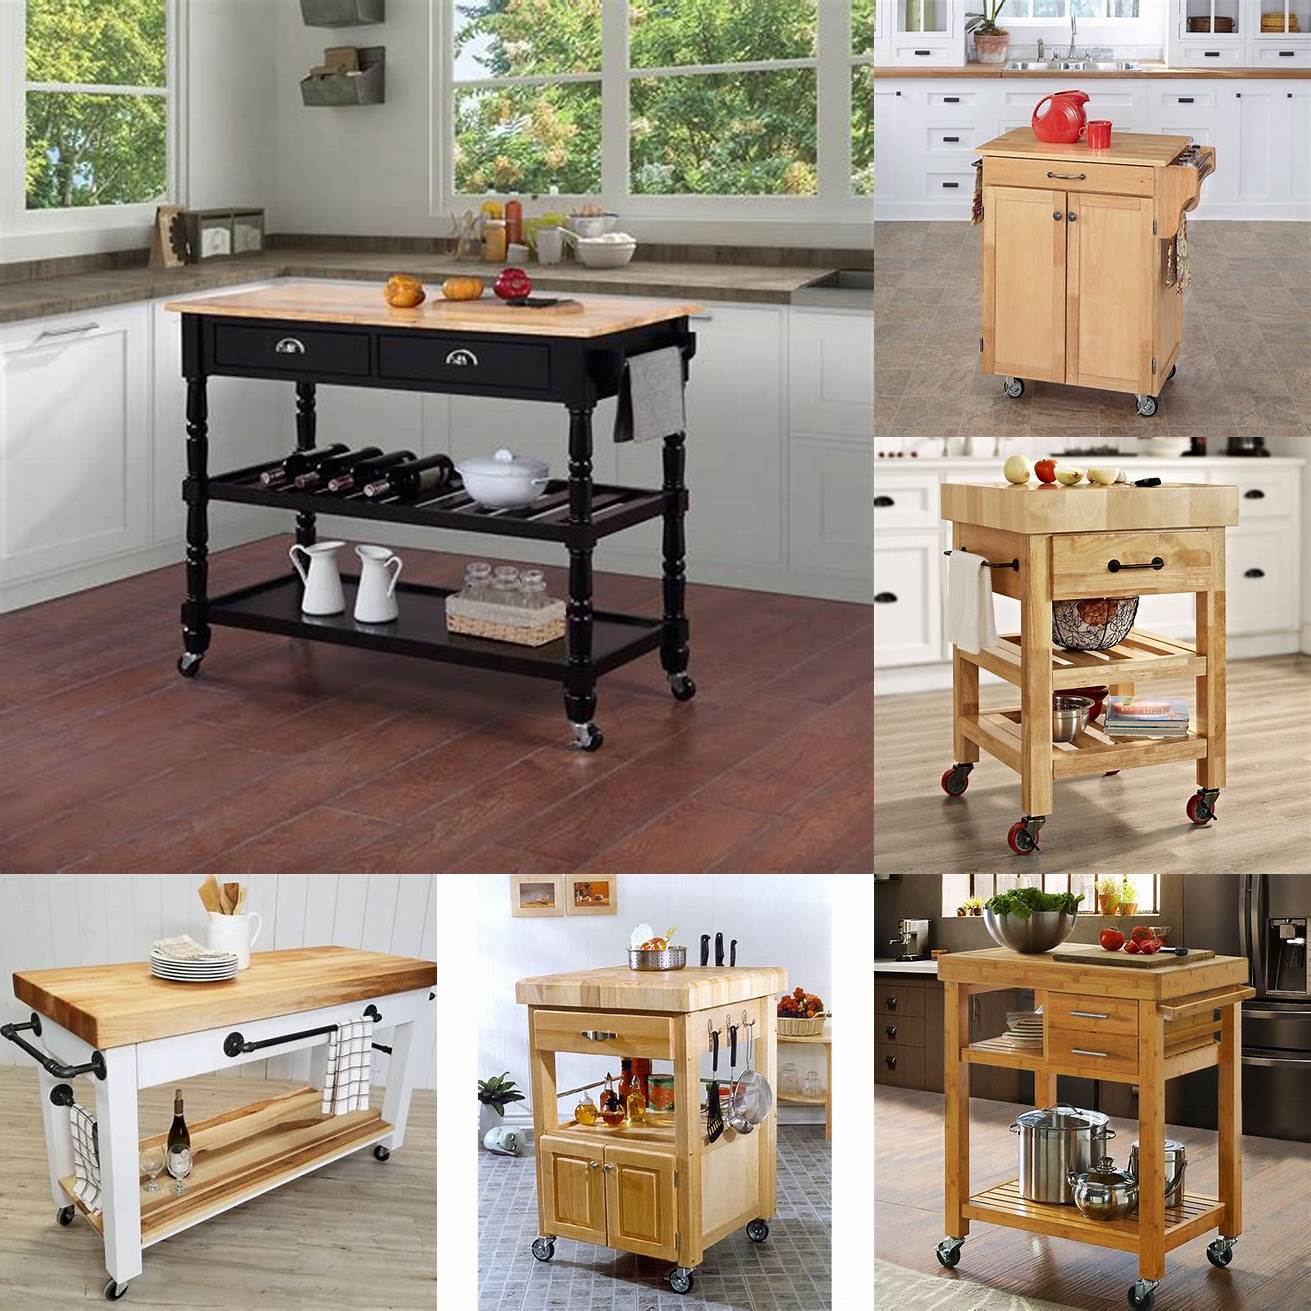 Butcher block kitchen cart with cutting board